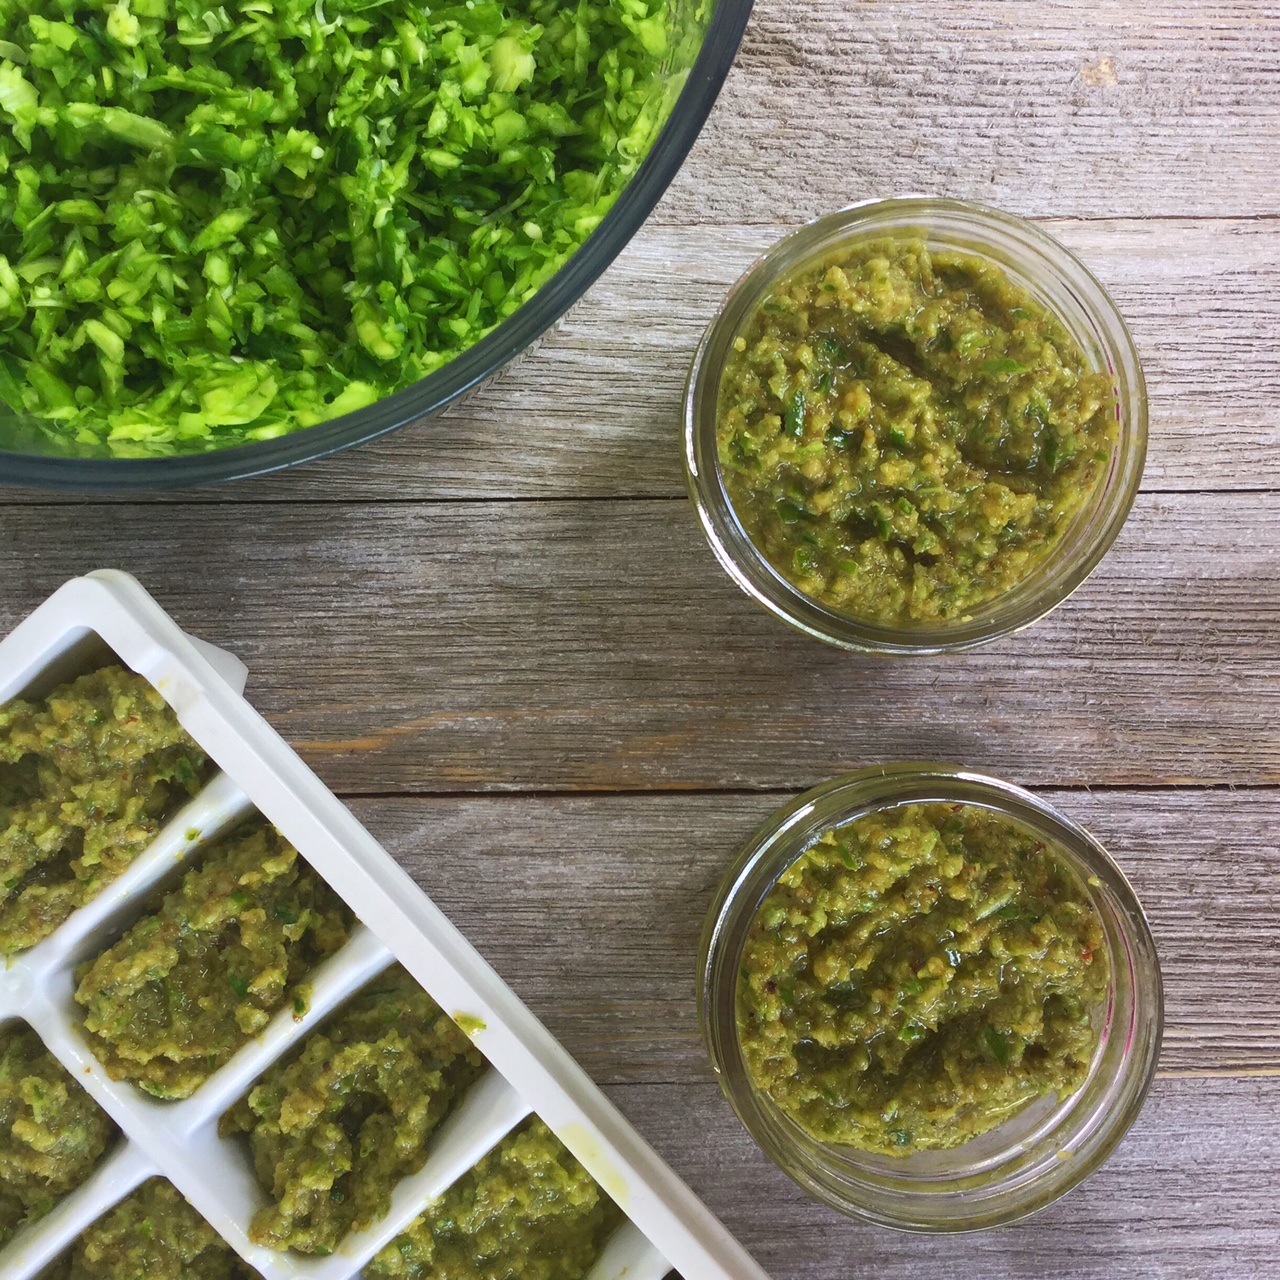 How to Use Garlic Scapes & My Favorite Garlic Scape Pesto Recipe | Healthy Recipes | Gluten Free | Vegan | My Healthy Homemade Life | Plant Based